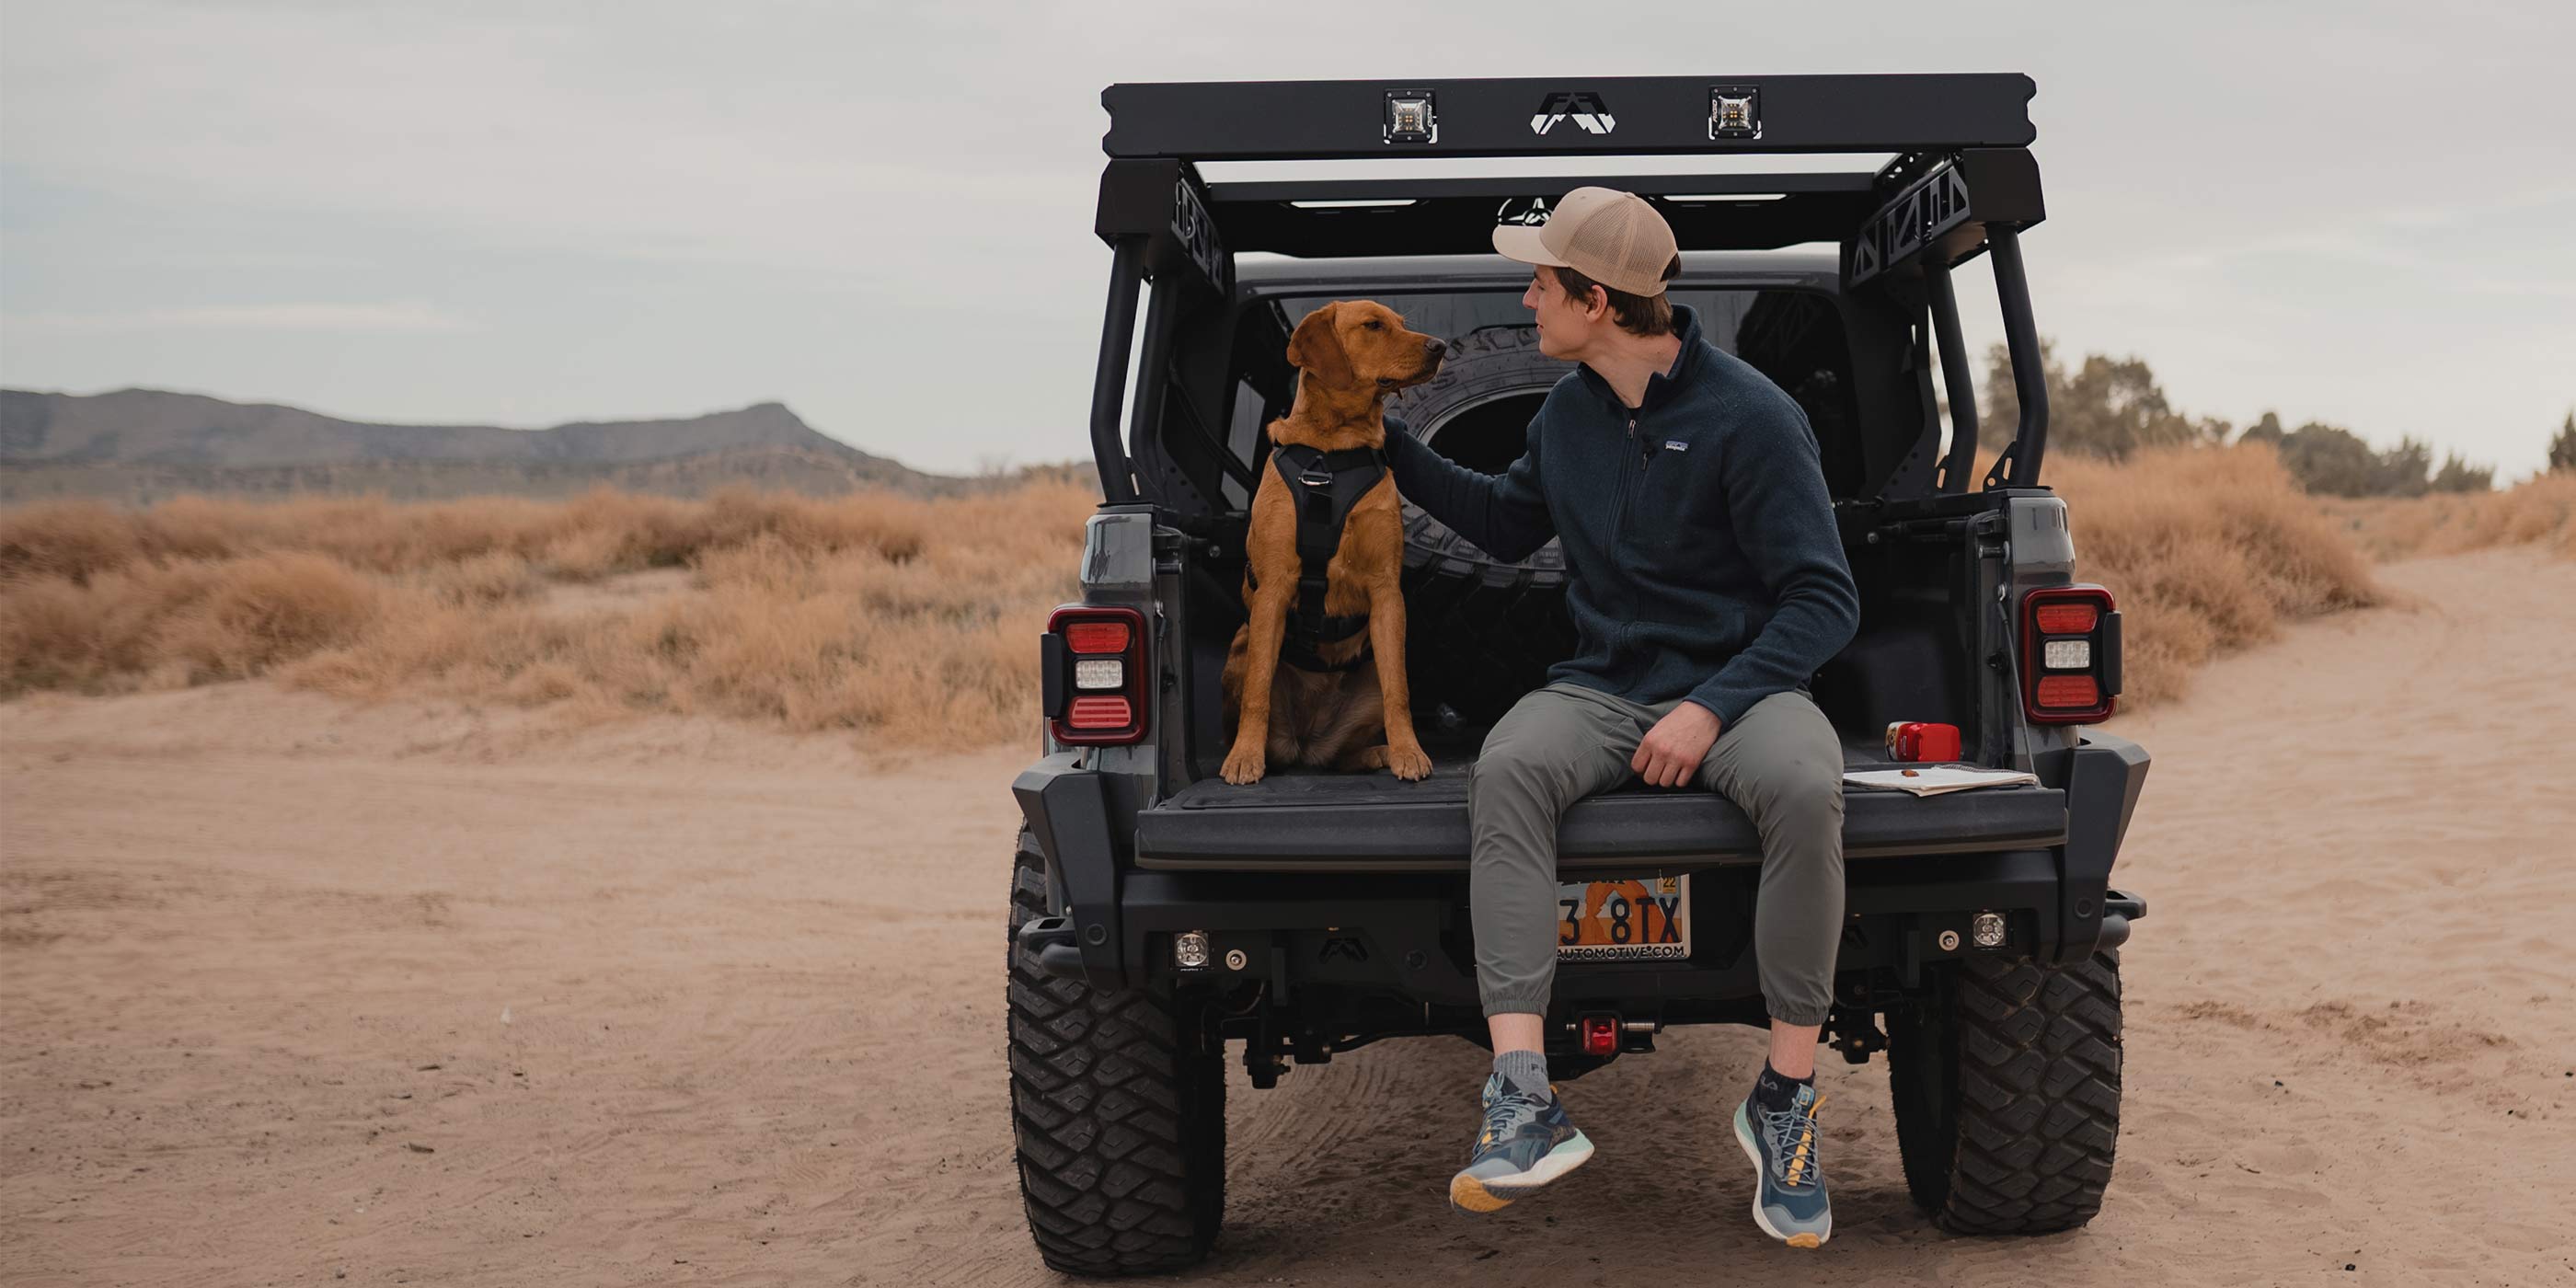 Saker founder in the trunk of a Jeep gladiator in the desert